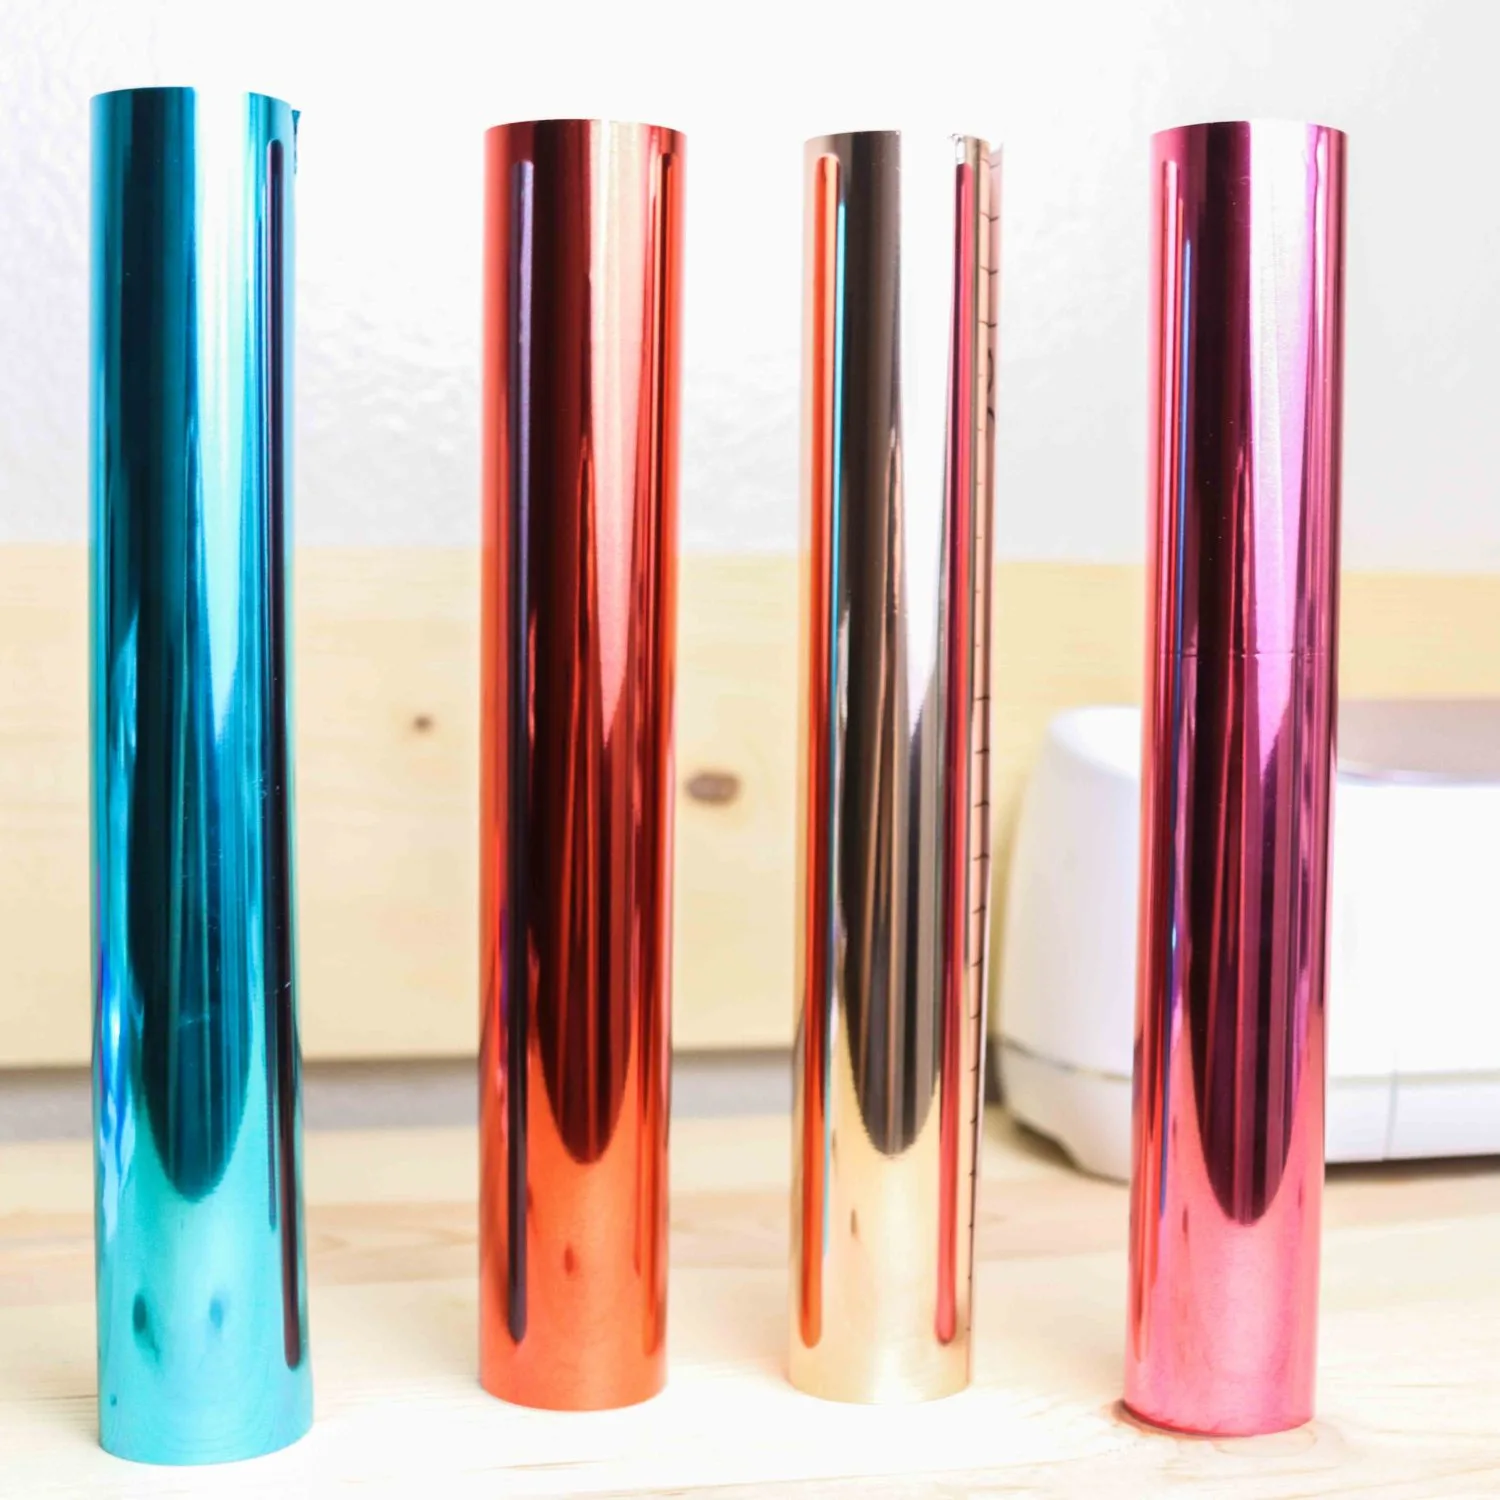 Different colors of foil adhesive vinyl rolls